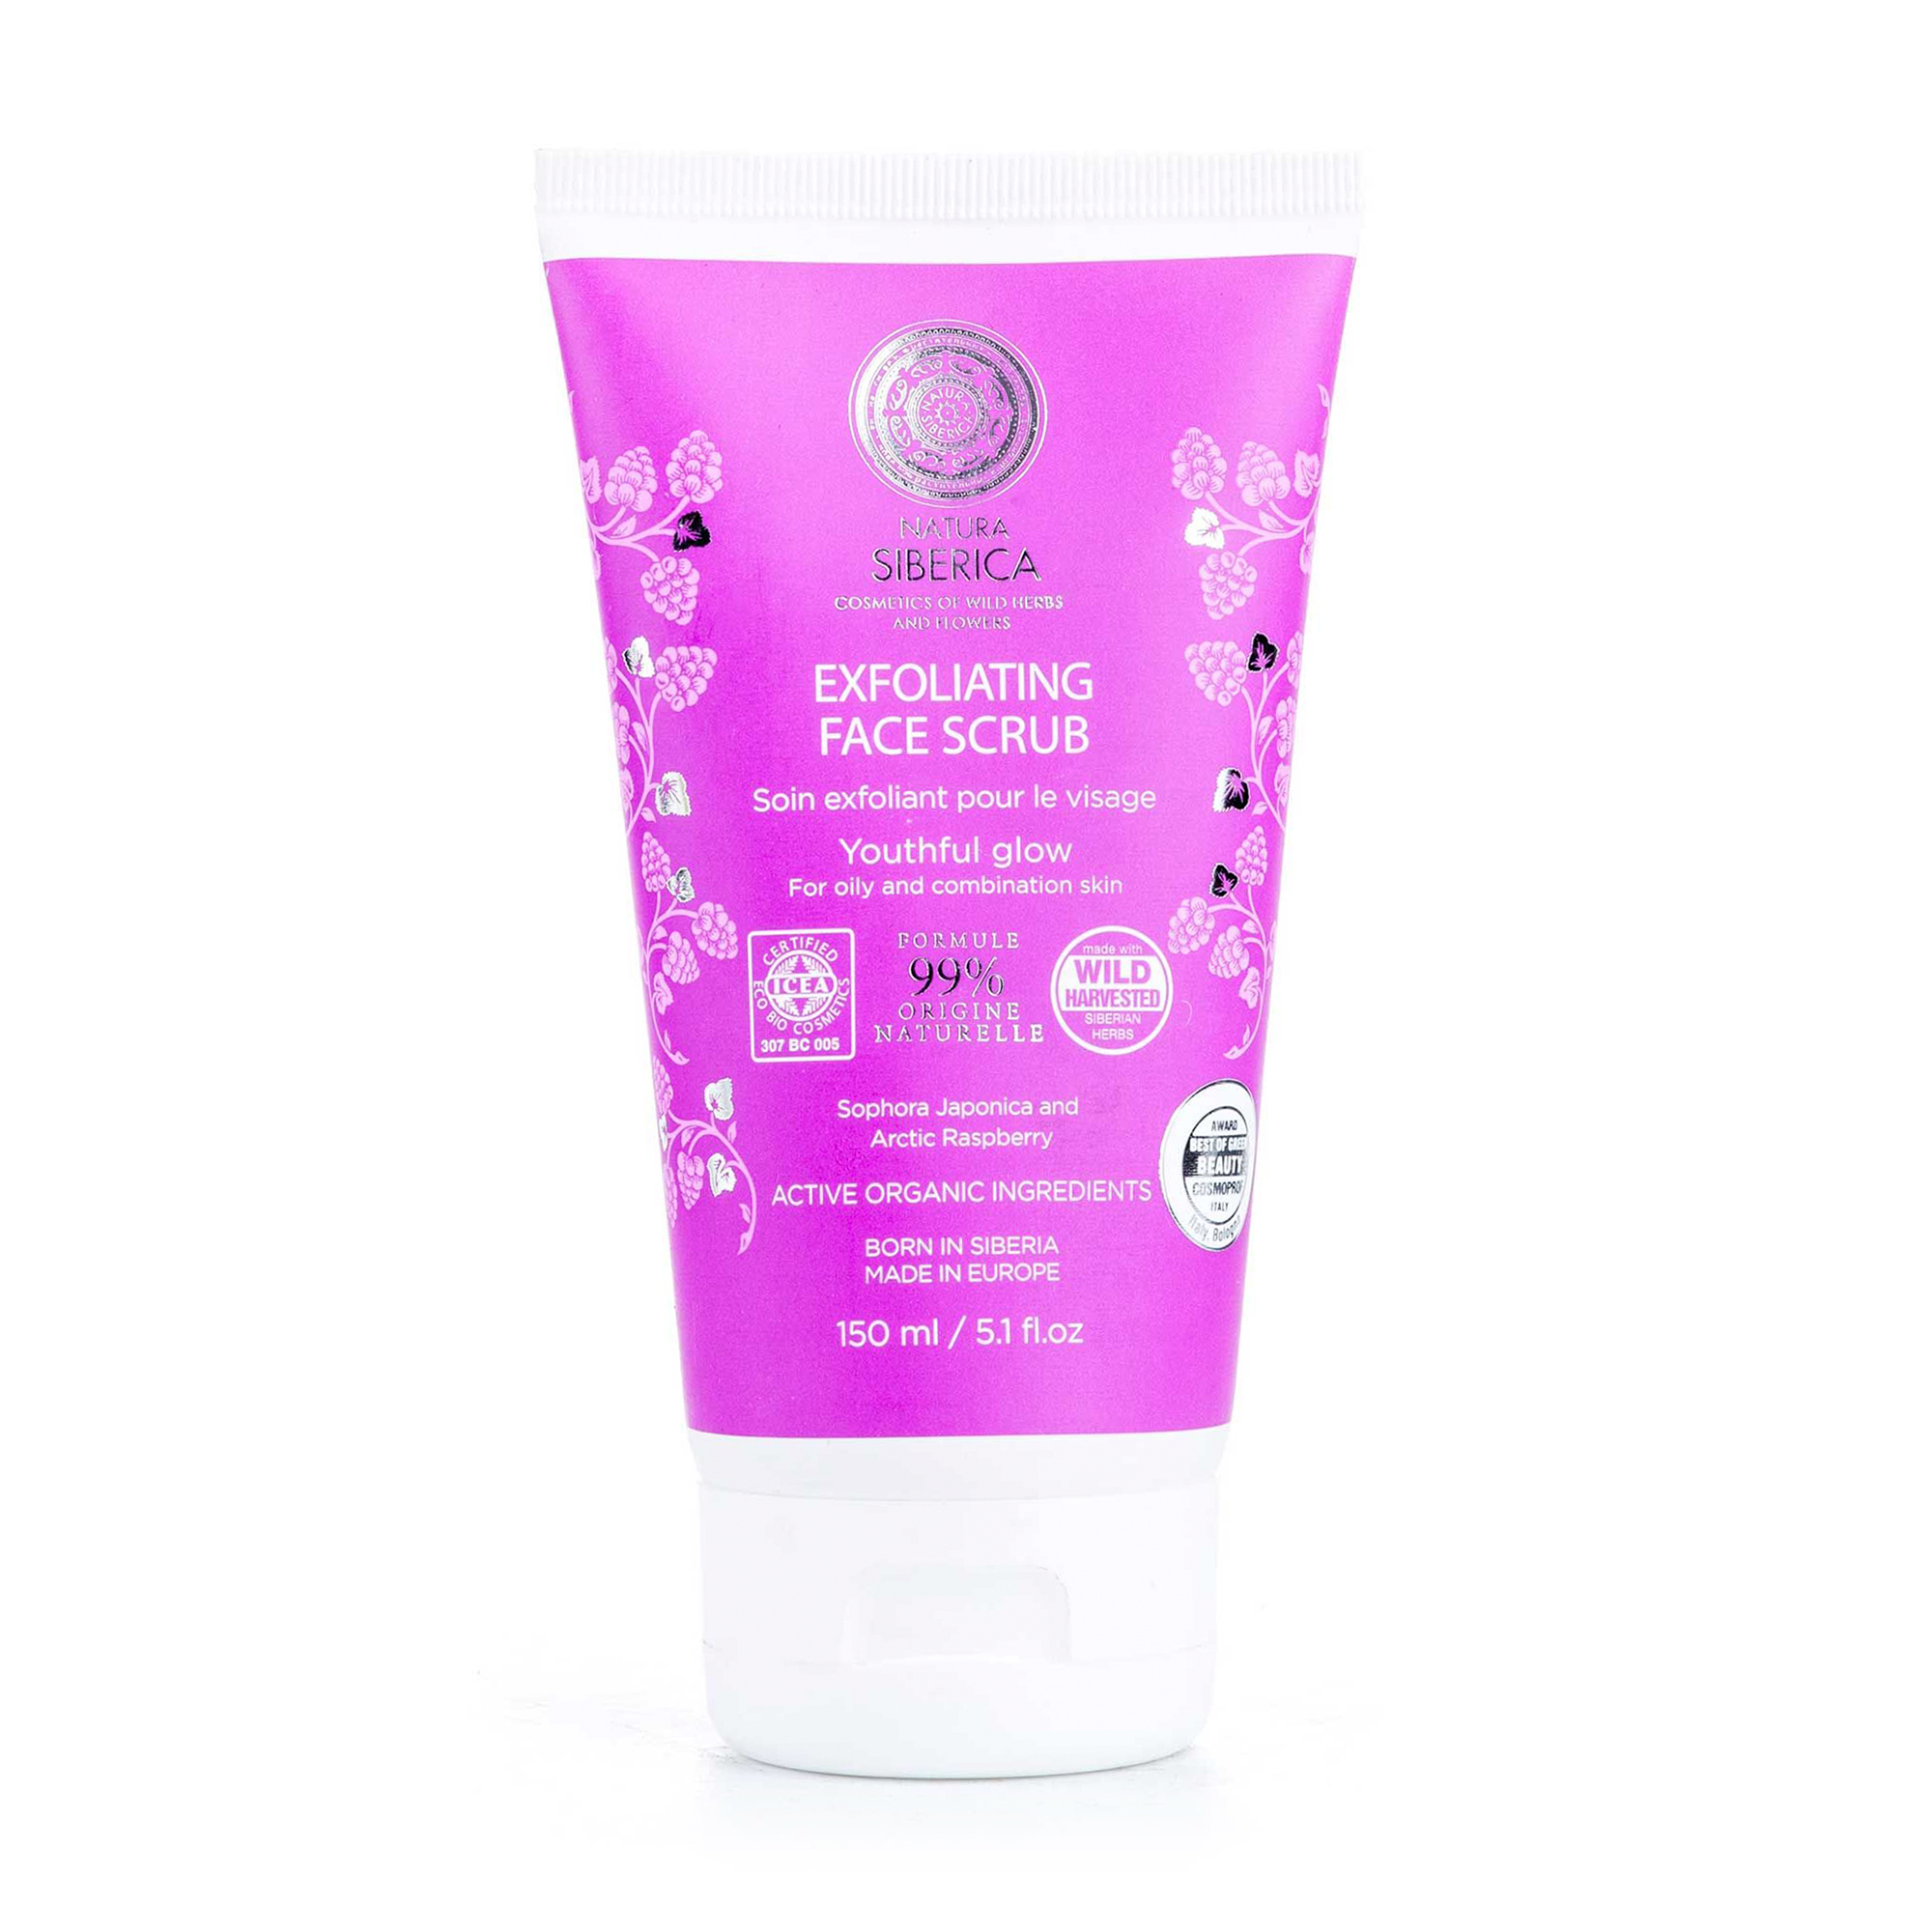 Exfoliating Facial Scrub for Oily and Combination Skin (NATURAL & ORGANIC), 5.1 oz/ 150 ml